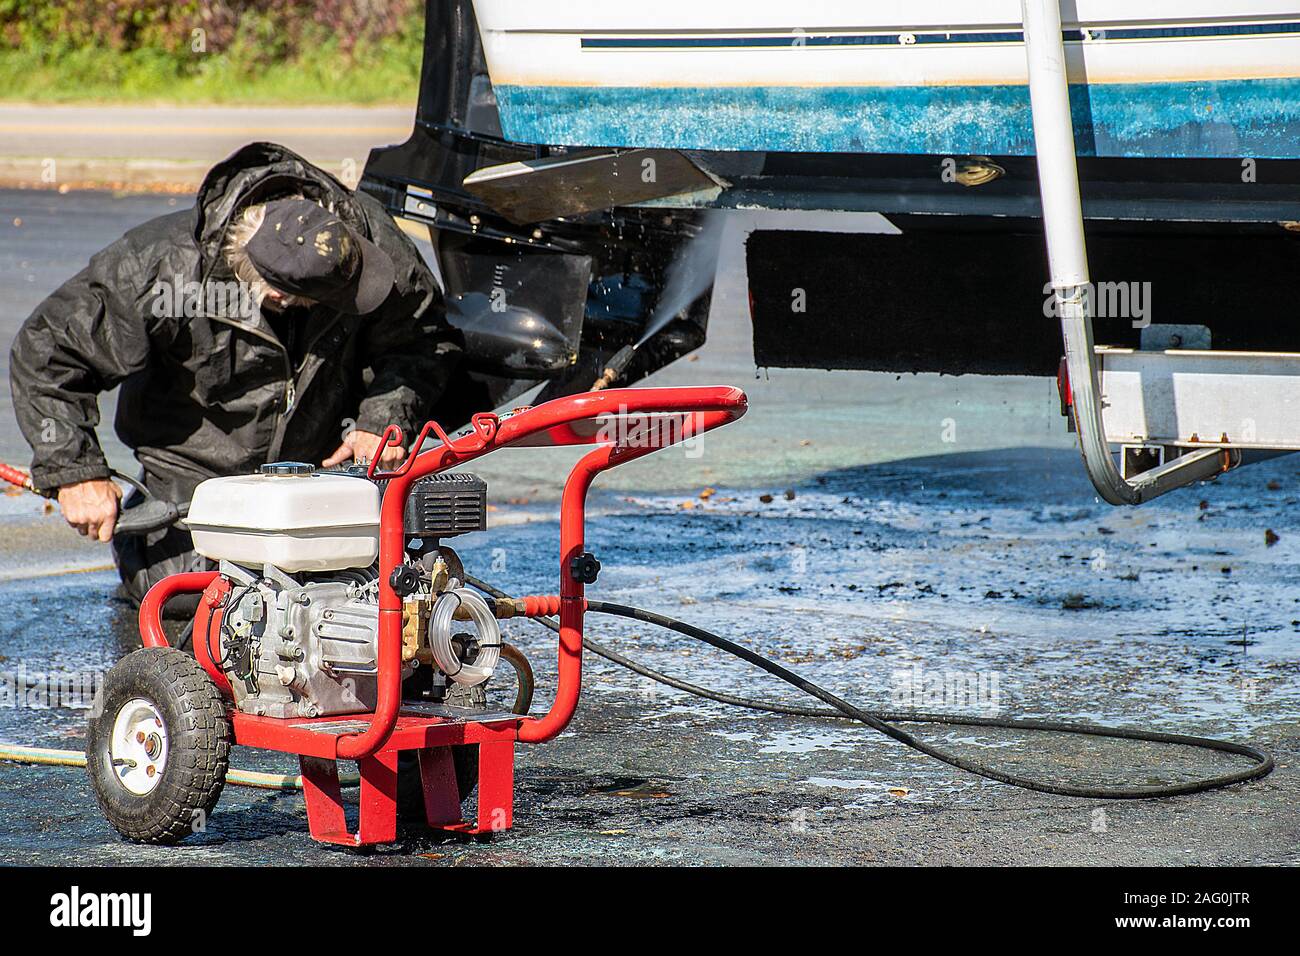 man cleaning underneath boat with pressure washer equipment Stock Photo